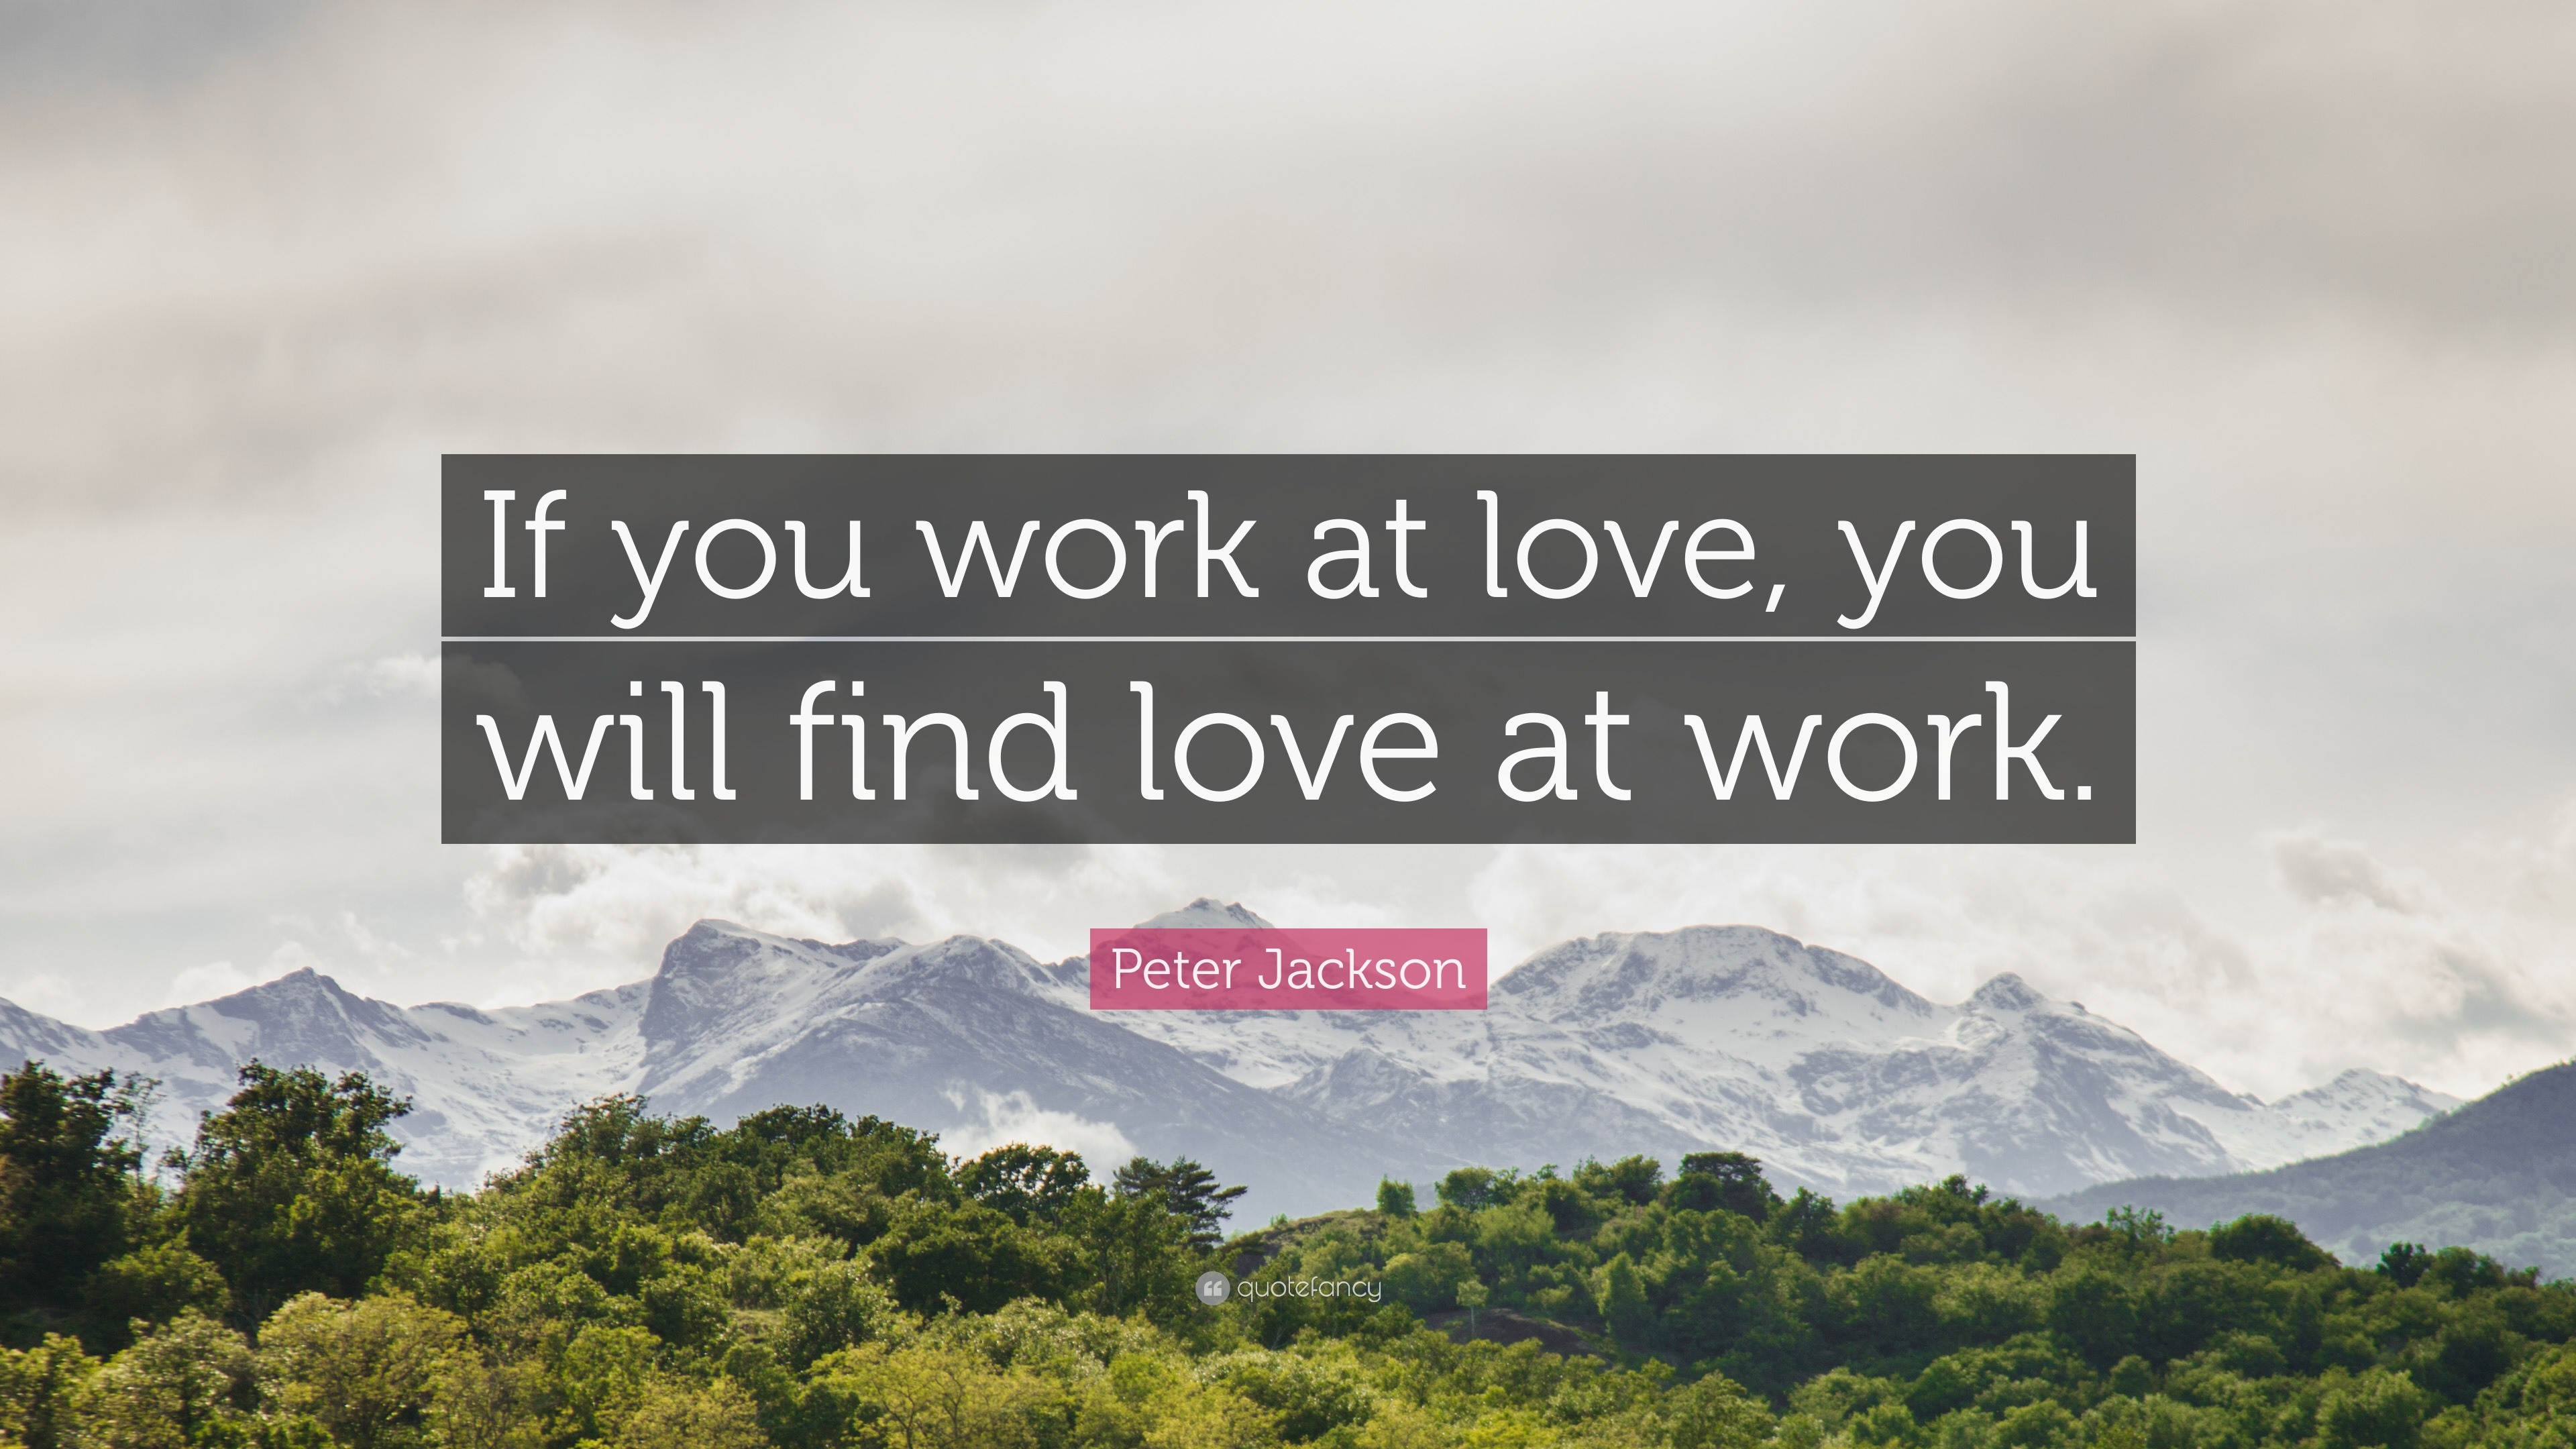 Peter Jackson Quote “If you work at love you will find love at